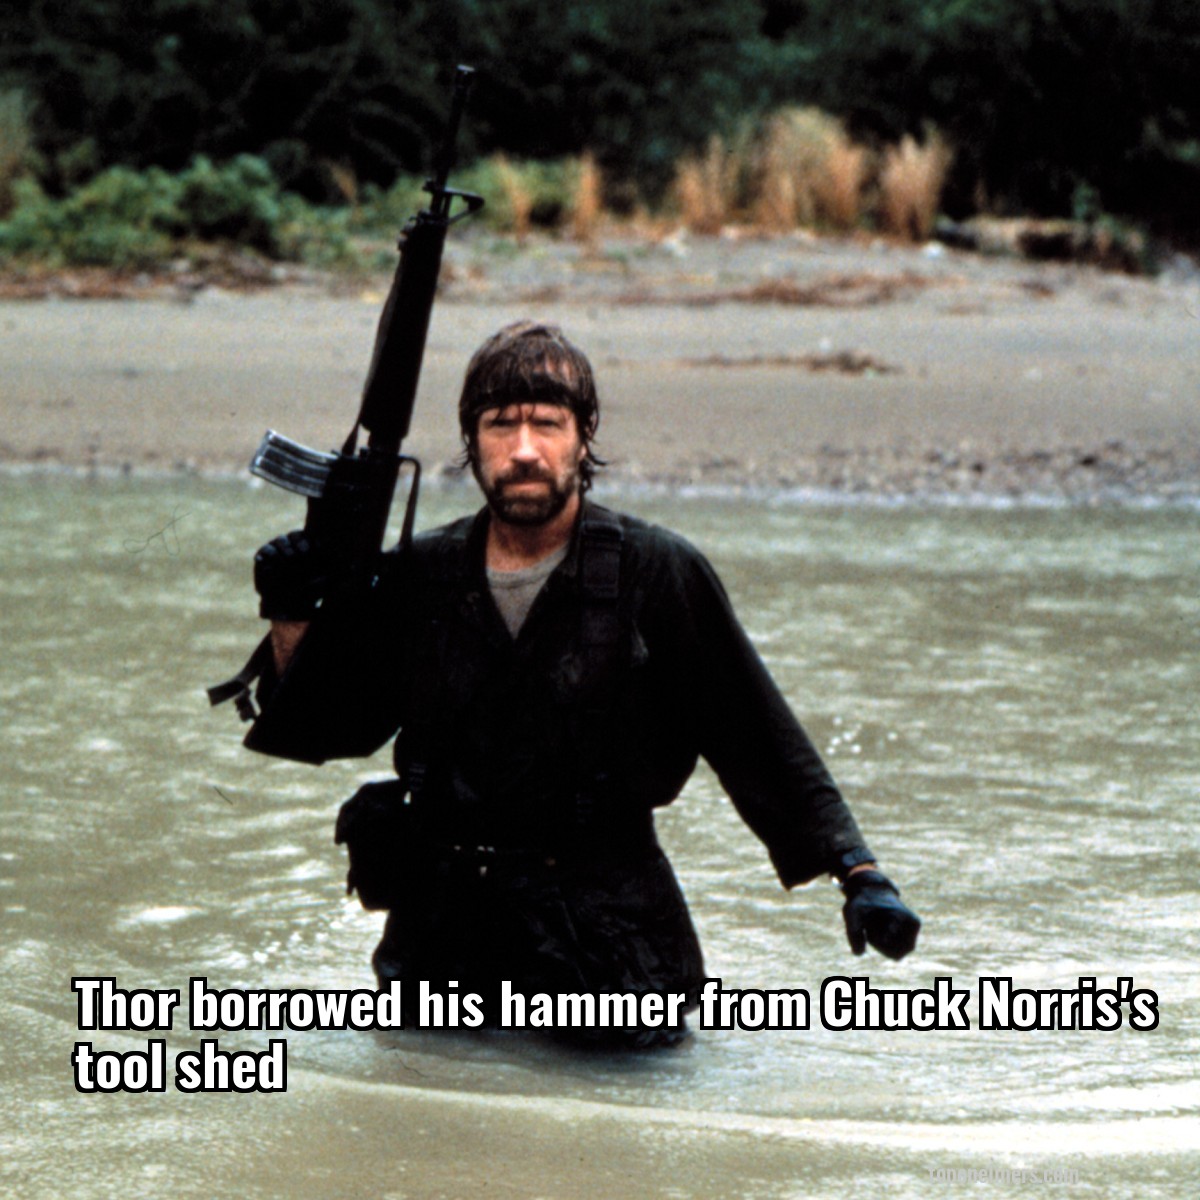 Thor borrowed his hammer from Chuck Norris's tool shed